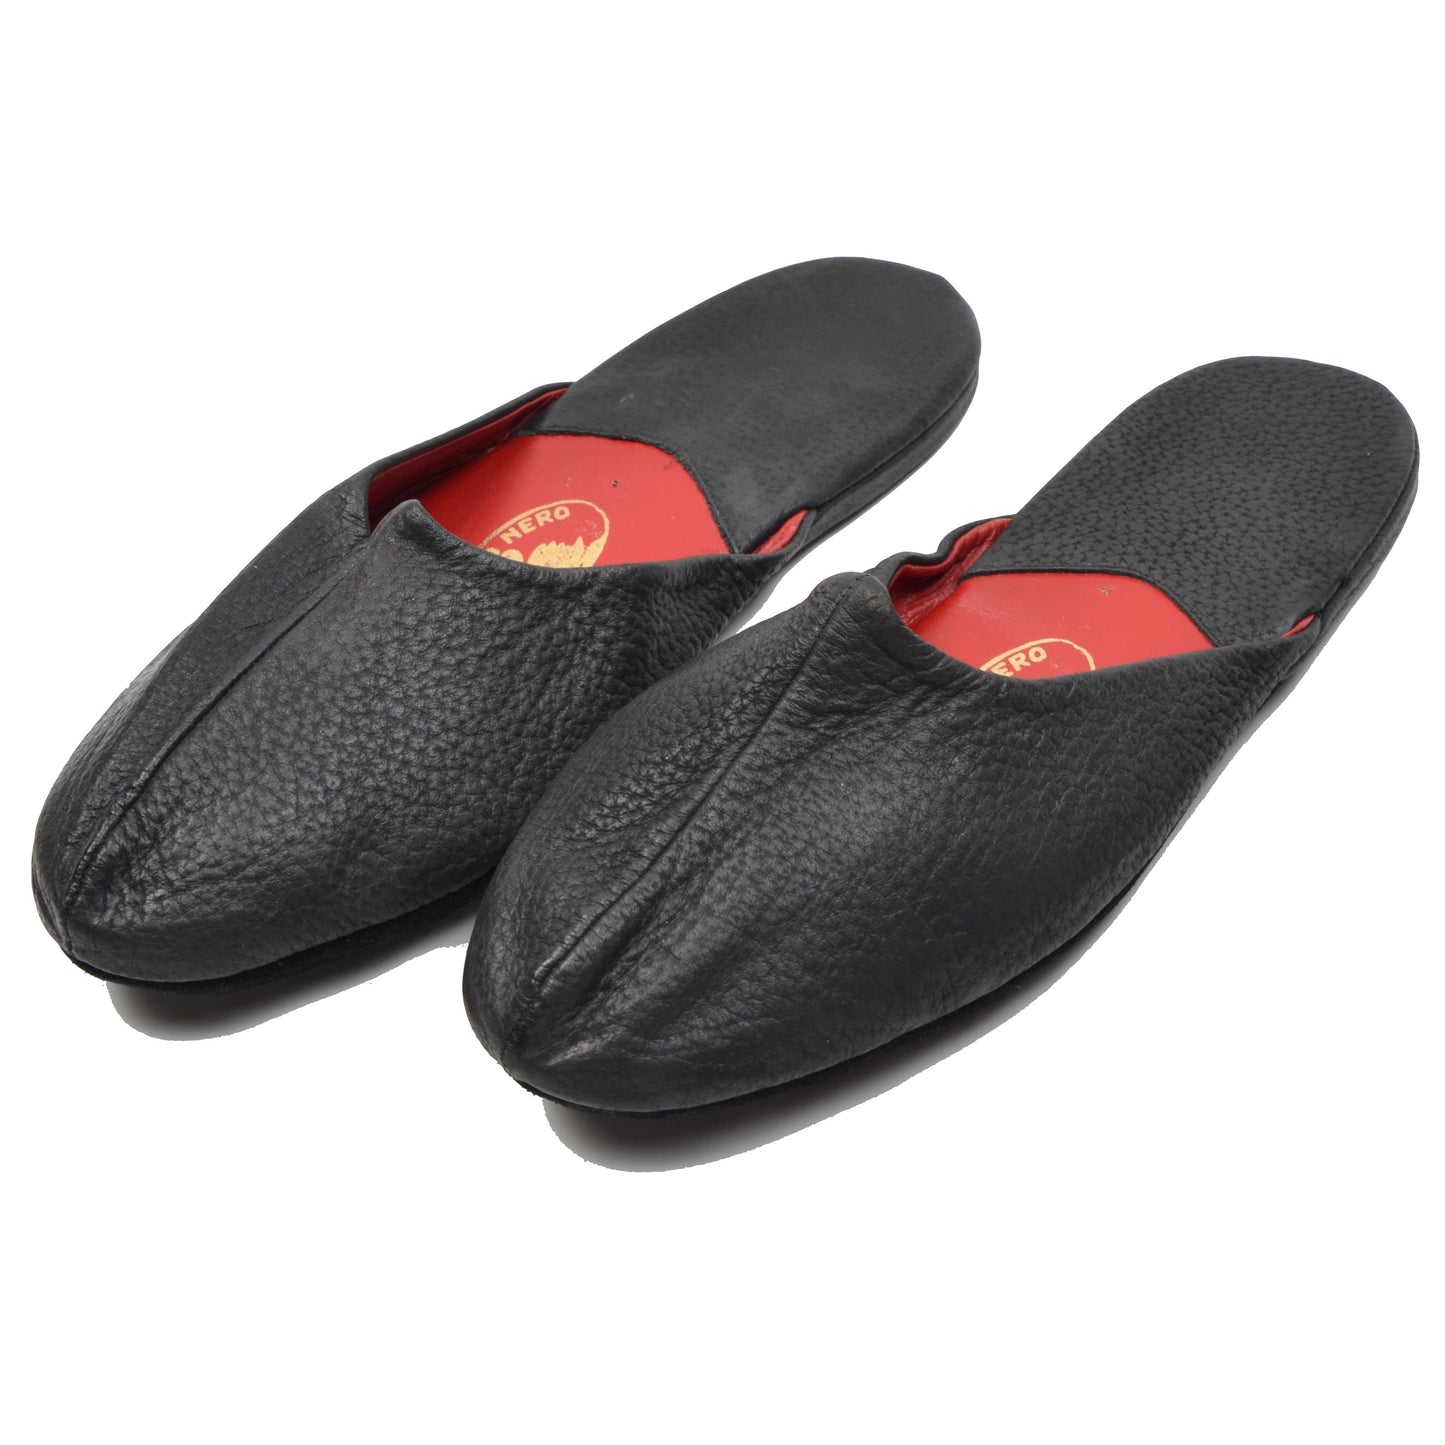 Vintage Leather Travel Slippers by Cigno Nero - Black